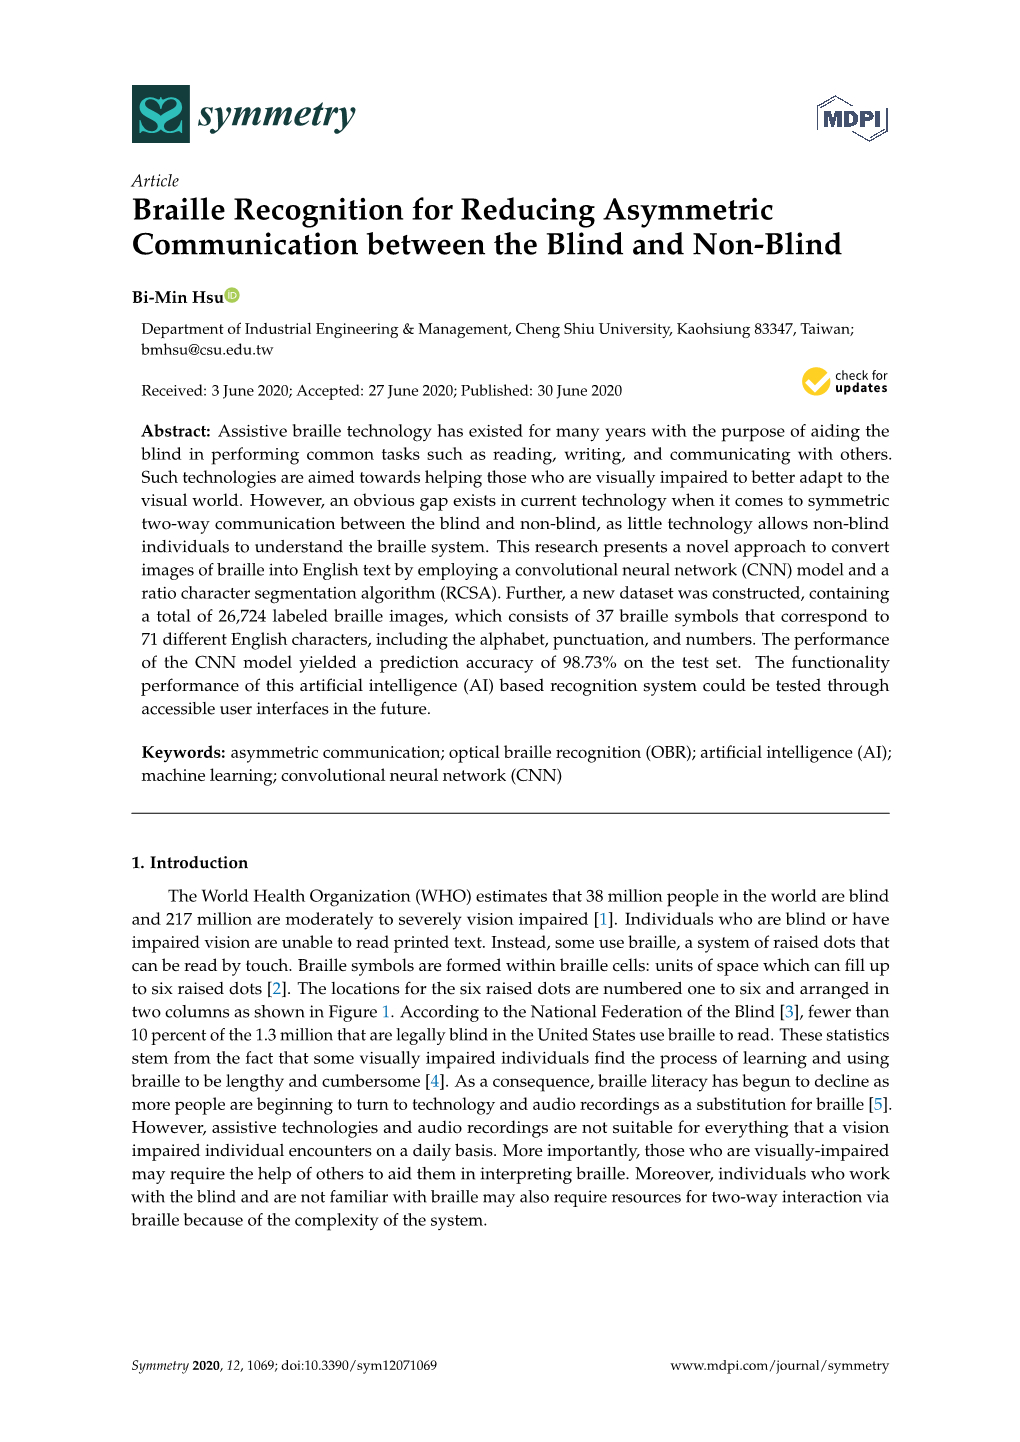 Braille Recognition for Reducing Asymmetric Communication Between the Blind and Non-Blind